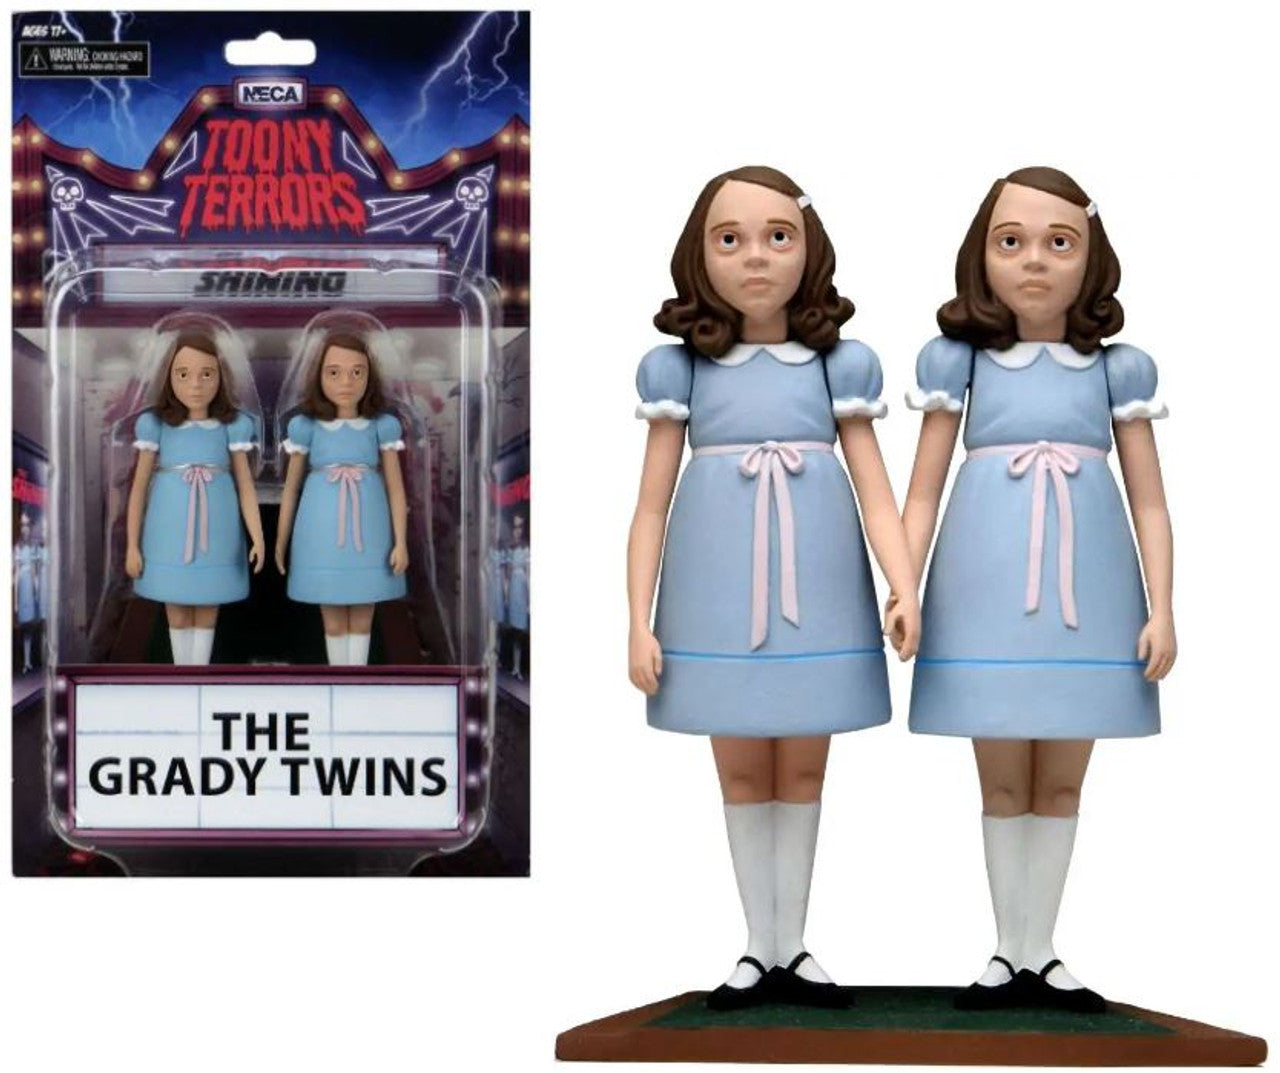 The Shining 6" Toony Terrors The Grady Twins Action Figure - Darkside Records